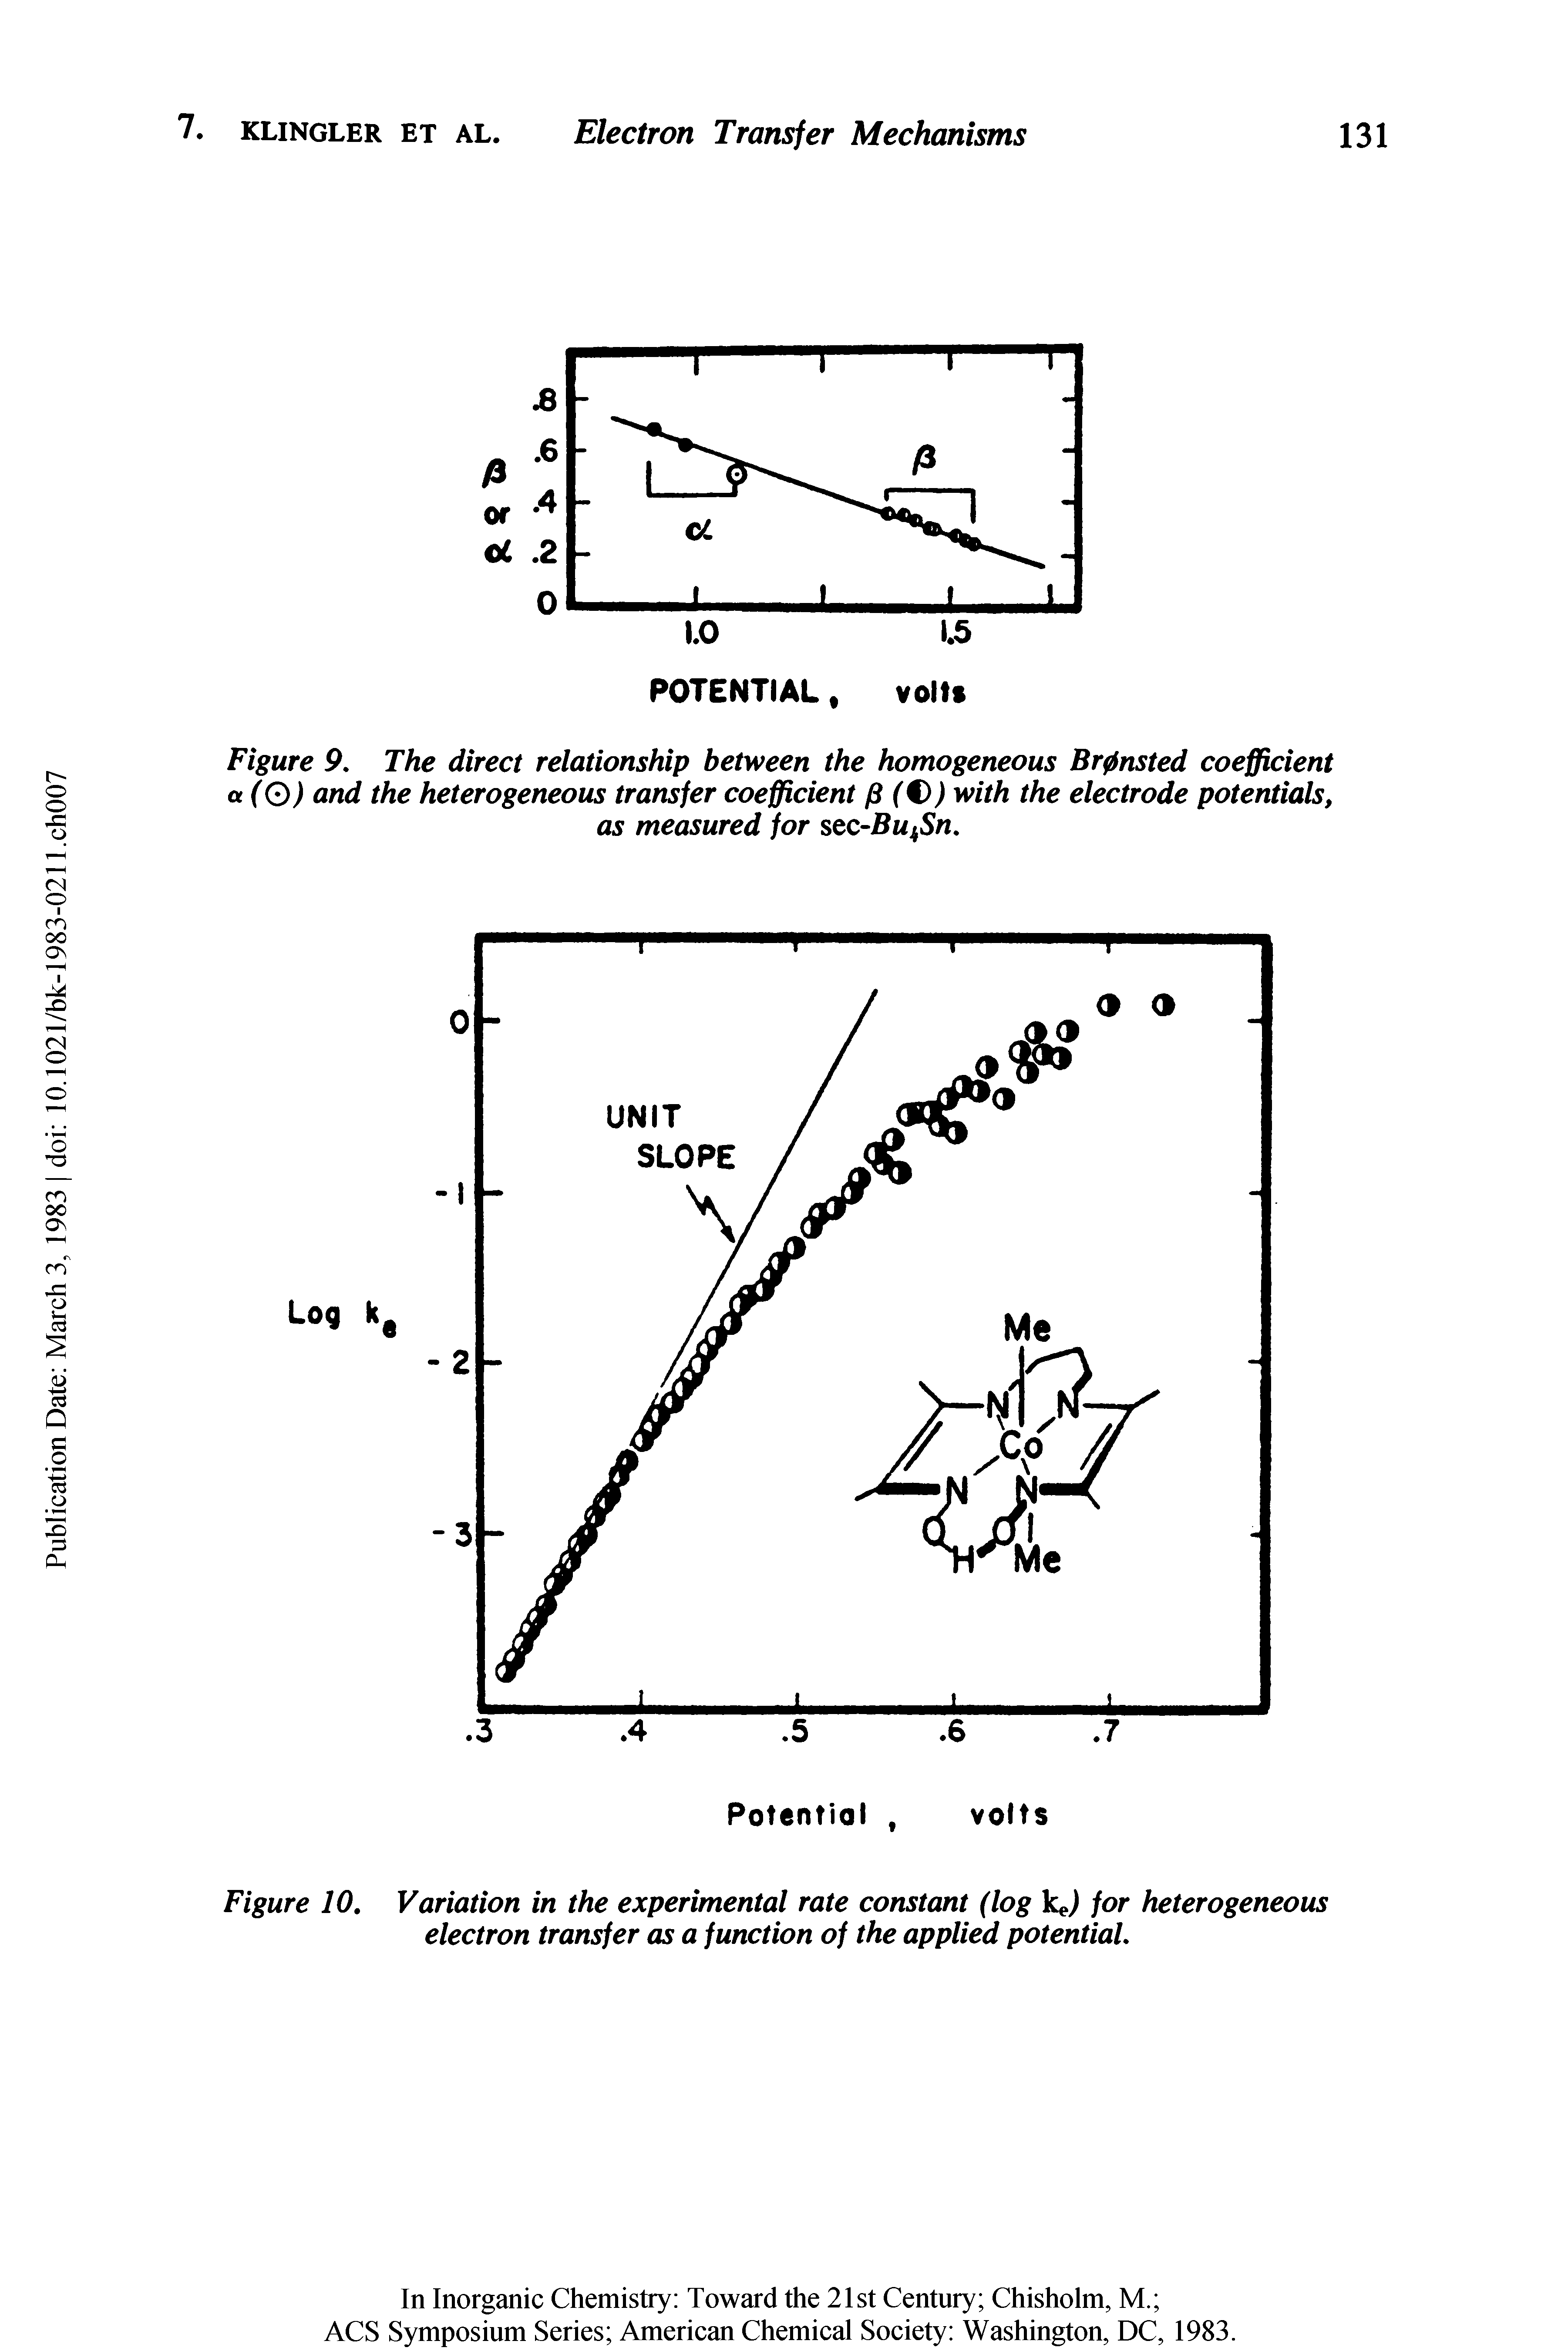 Figure 10. Variation in the experimental rate constant (log kj for heterogeneous electron transfer as a function of the applied potential.